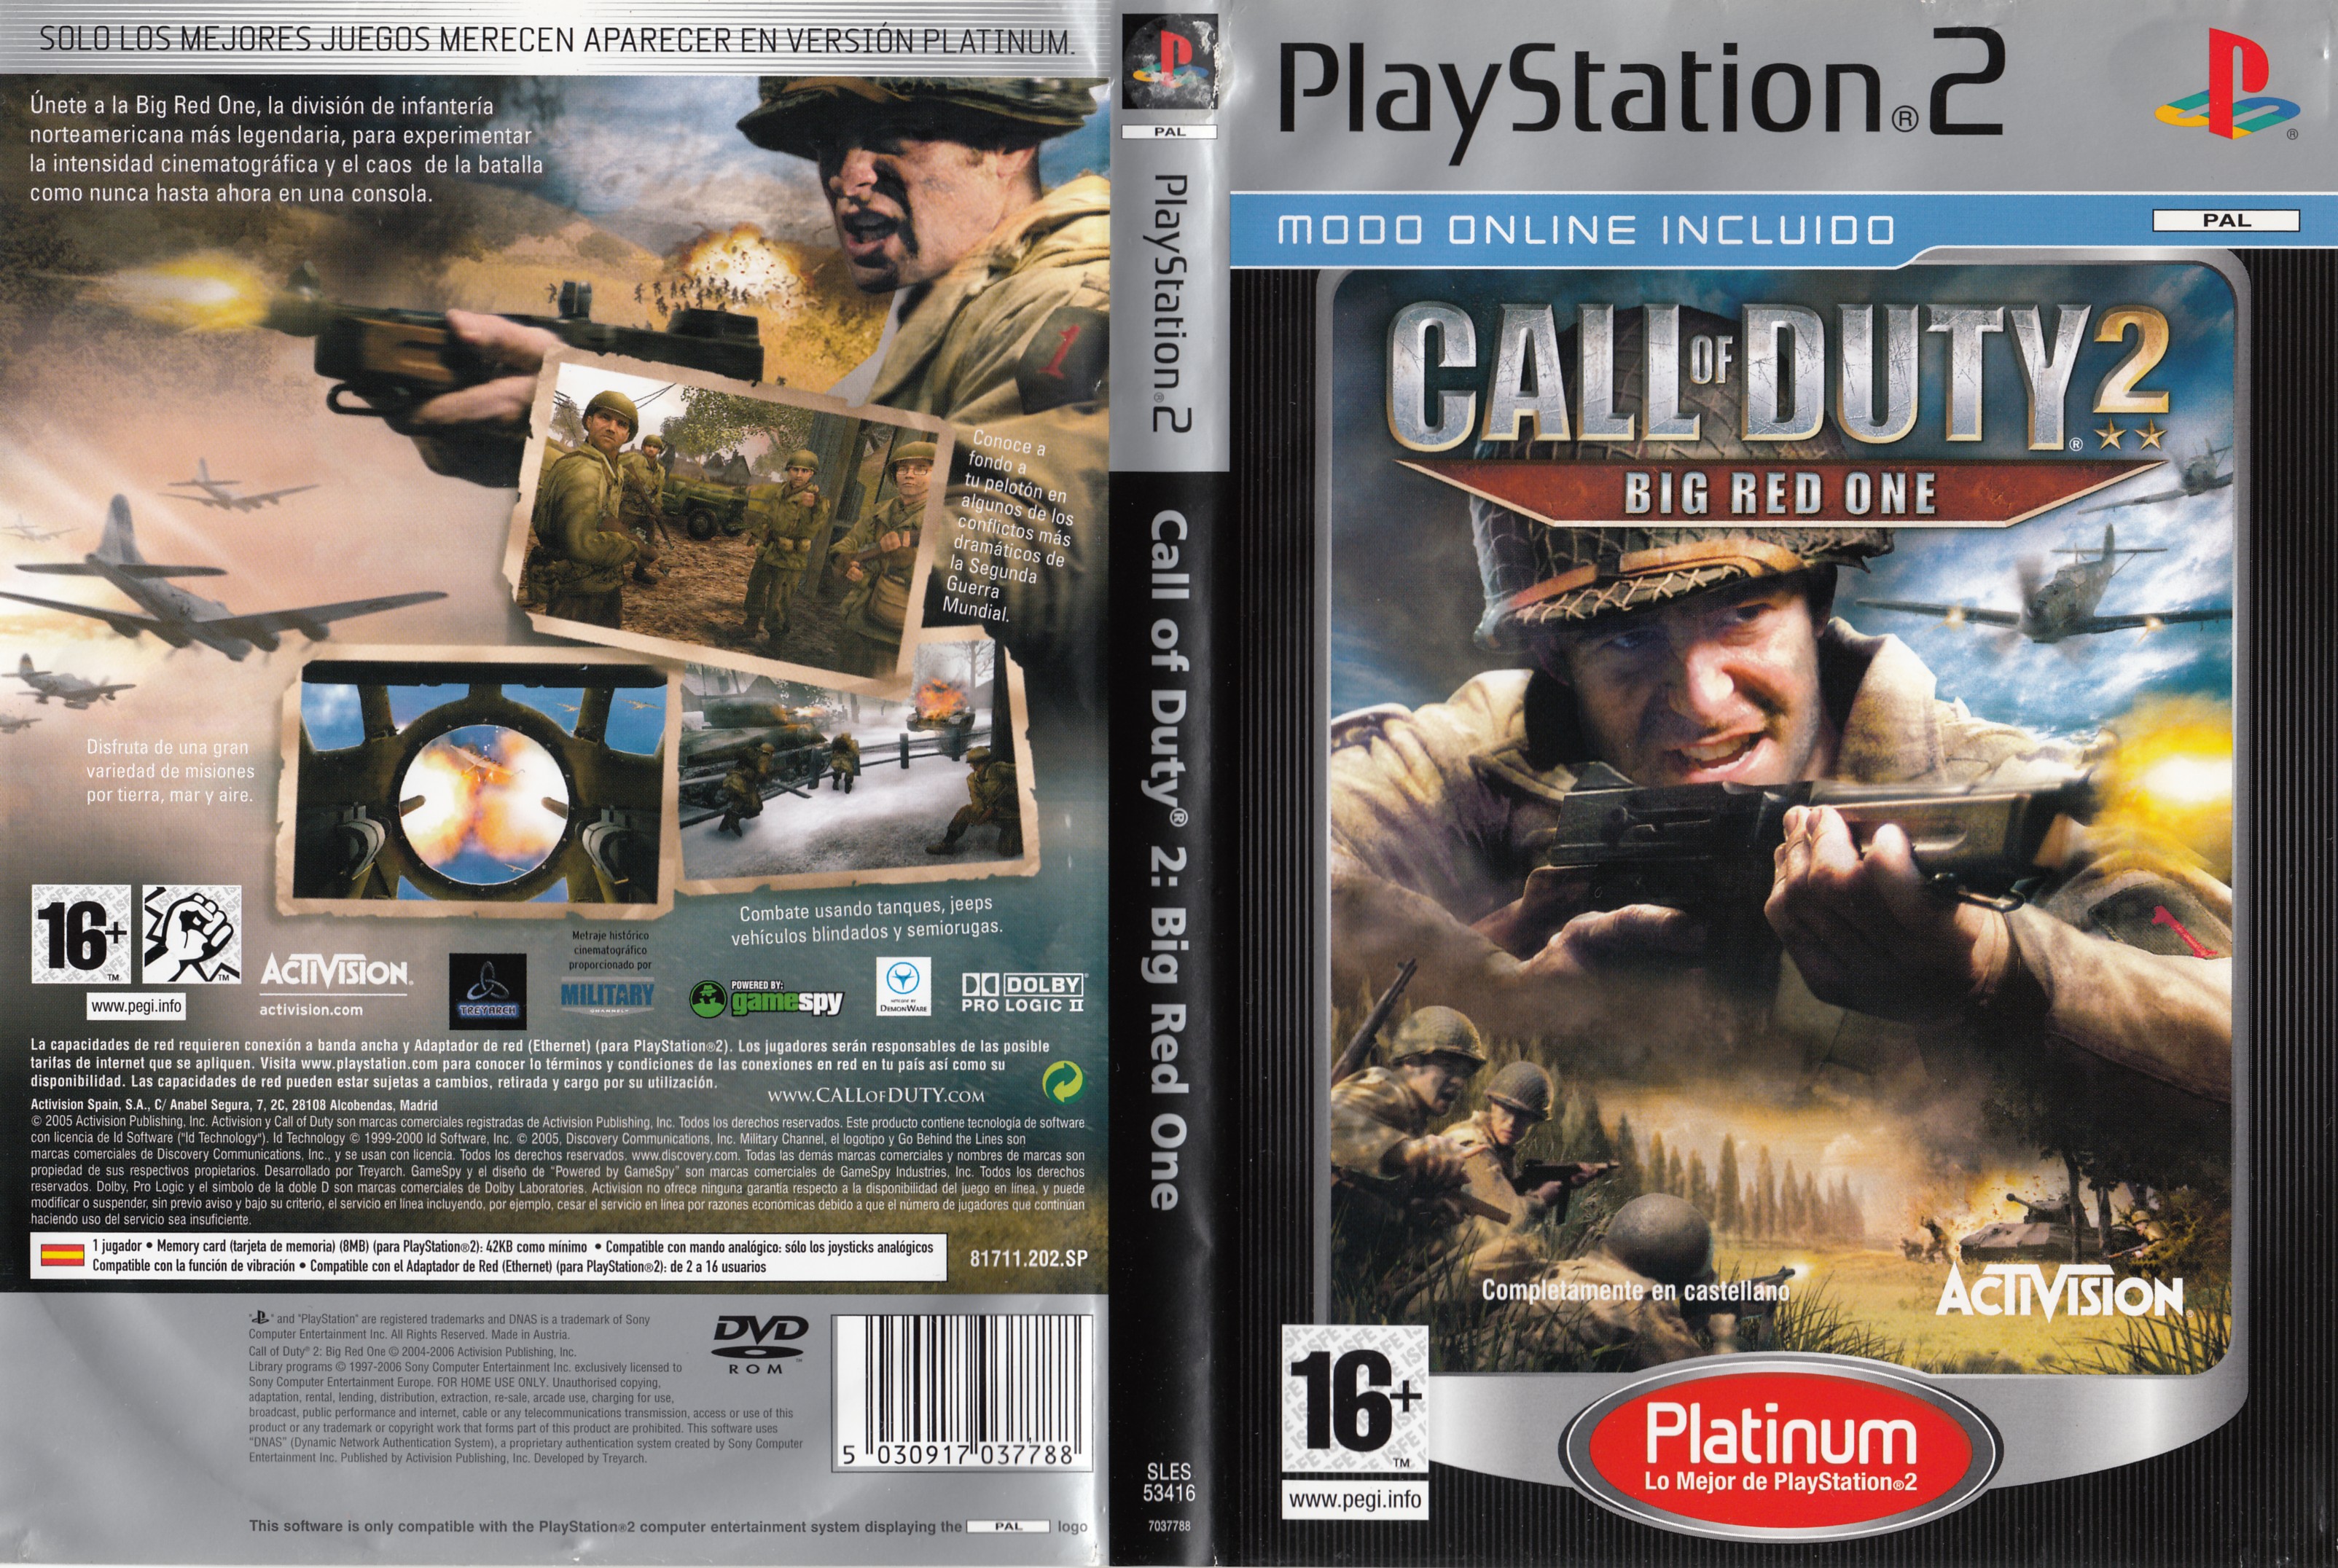 call-of-duty-2-big-red-one-ps2-not-loading-ovasgville